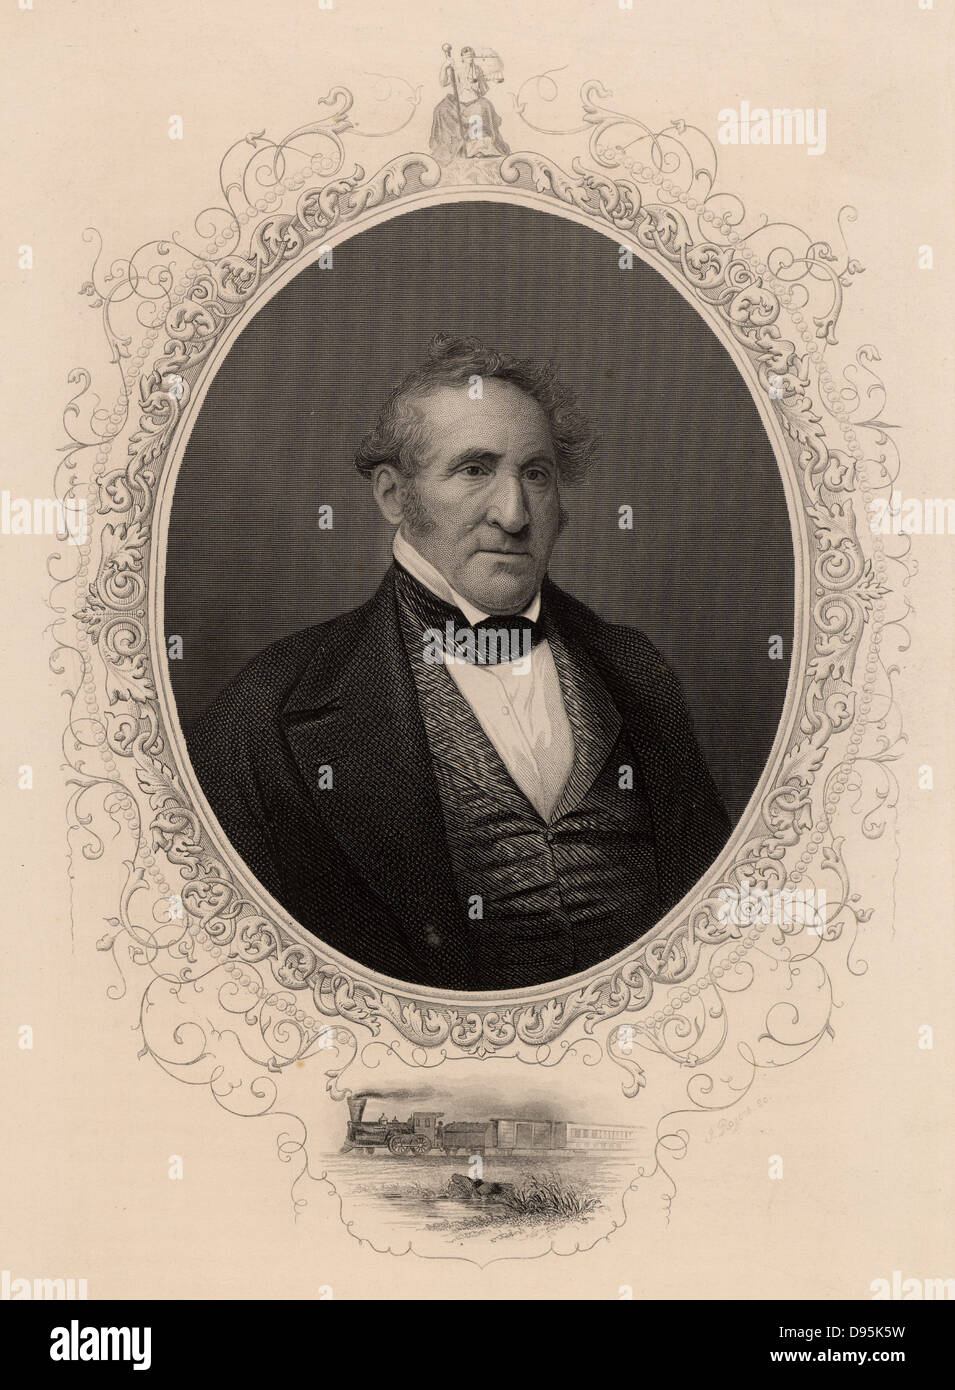 Thomas Hart Benton (1782-1858), American lawyer, newspaper owner and statesman, born at Harts Mill, North Carolina. Senator for Missouri. From 1824 Benton was a staunch supporter of Andrew Jackson.  His nickname was Old Bullion because of his advocacy of hard money - currency backed by gold. Stock Photo